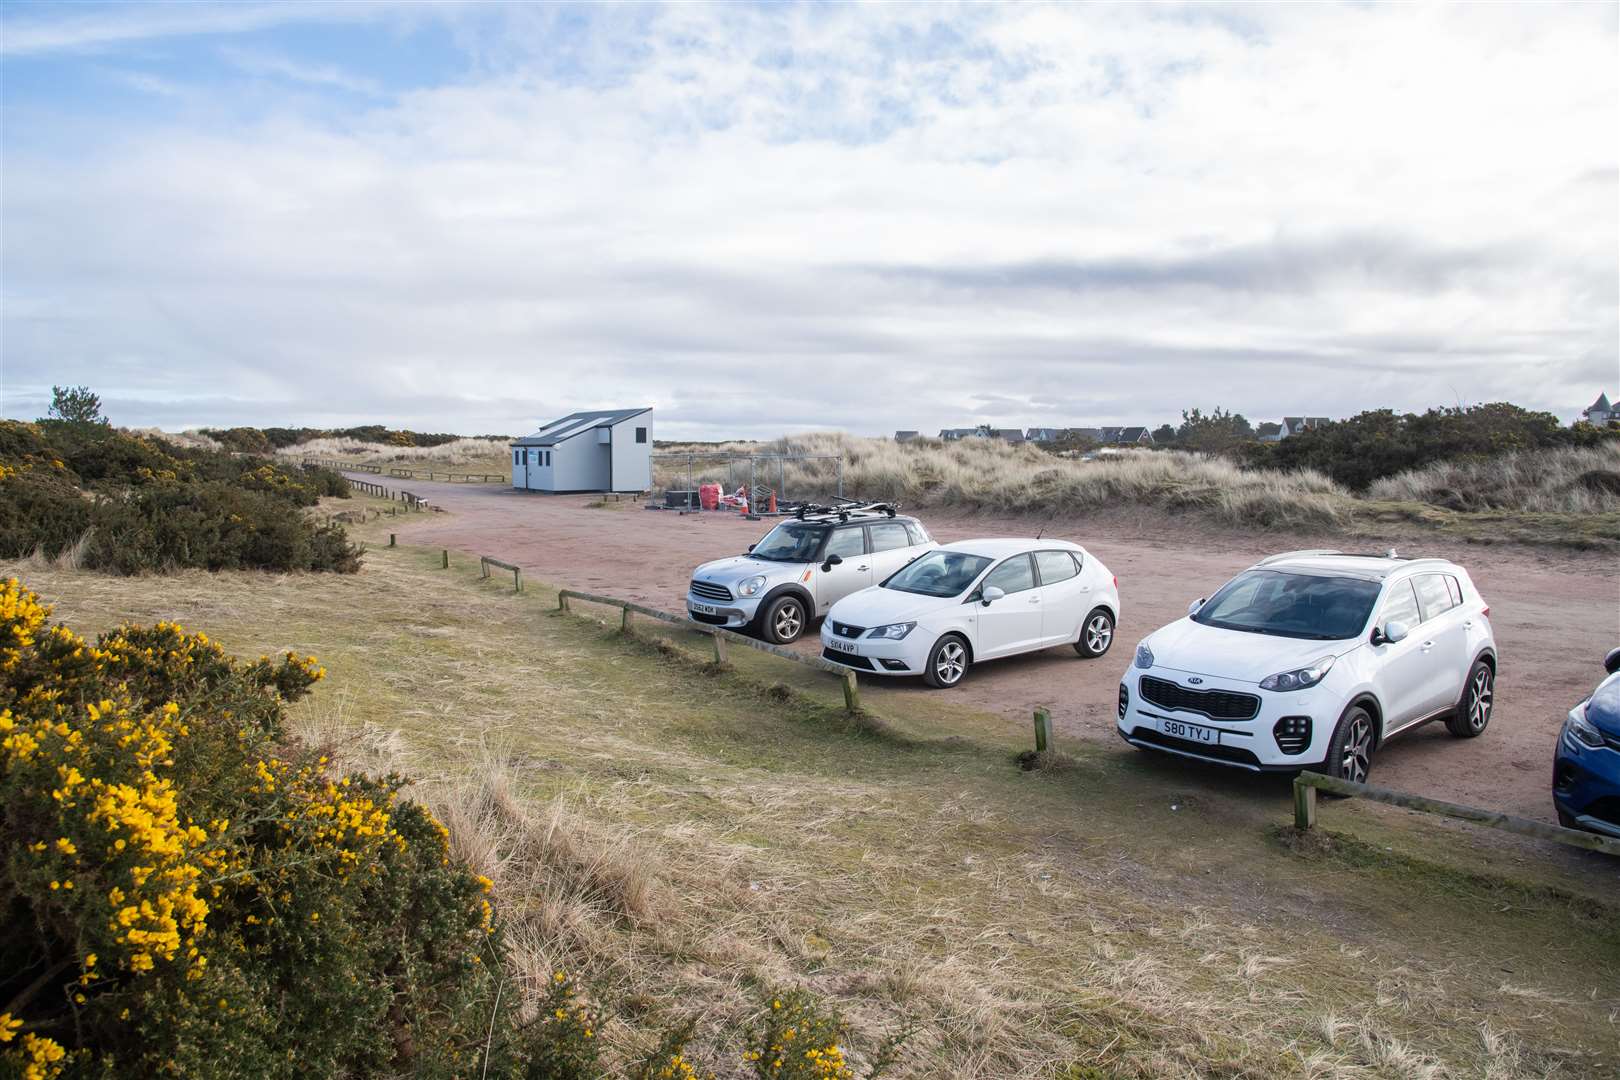 Non-Findhorn residents will be charged £1-a-day to use the west beach car park. Picture: Daniel Forsyth